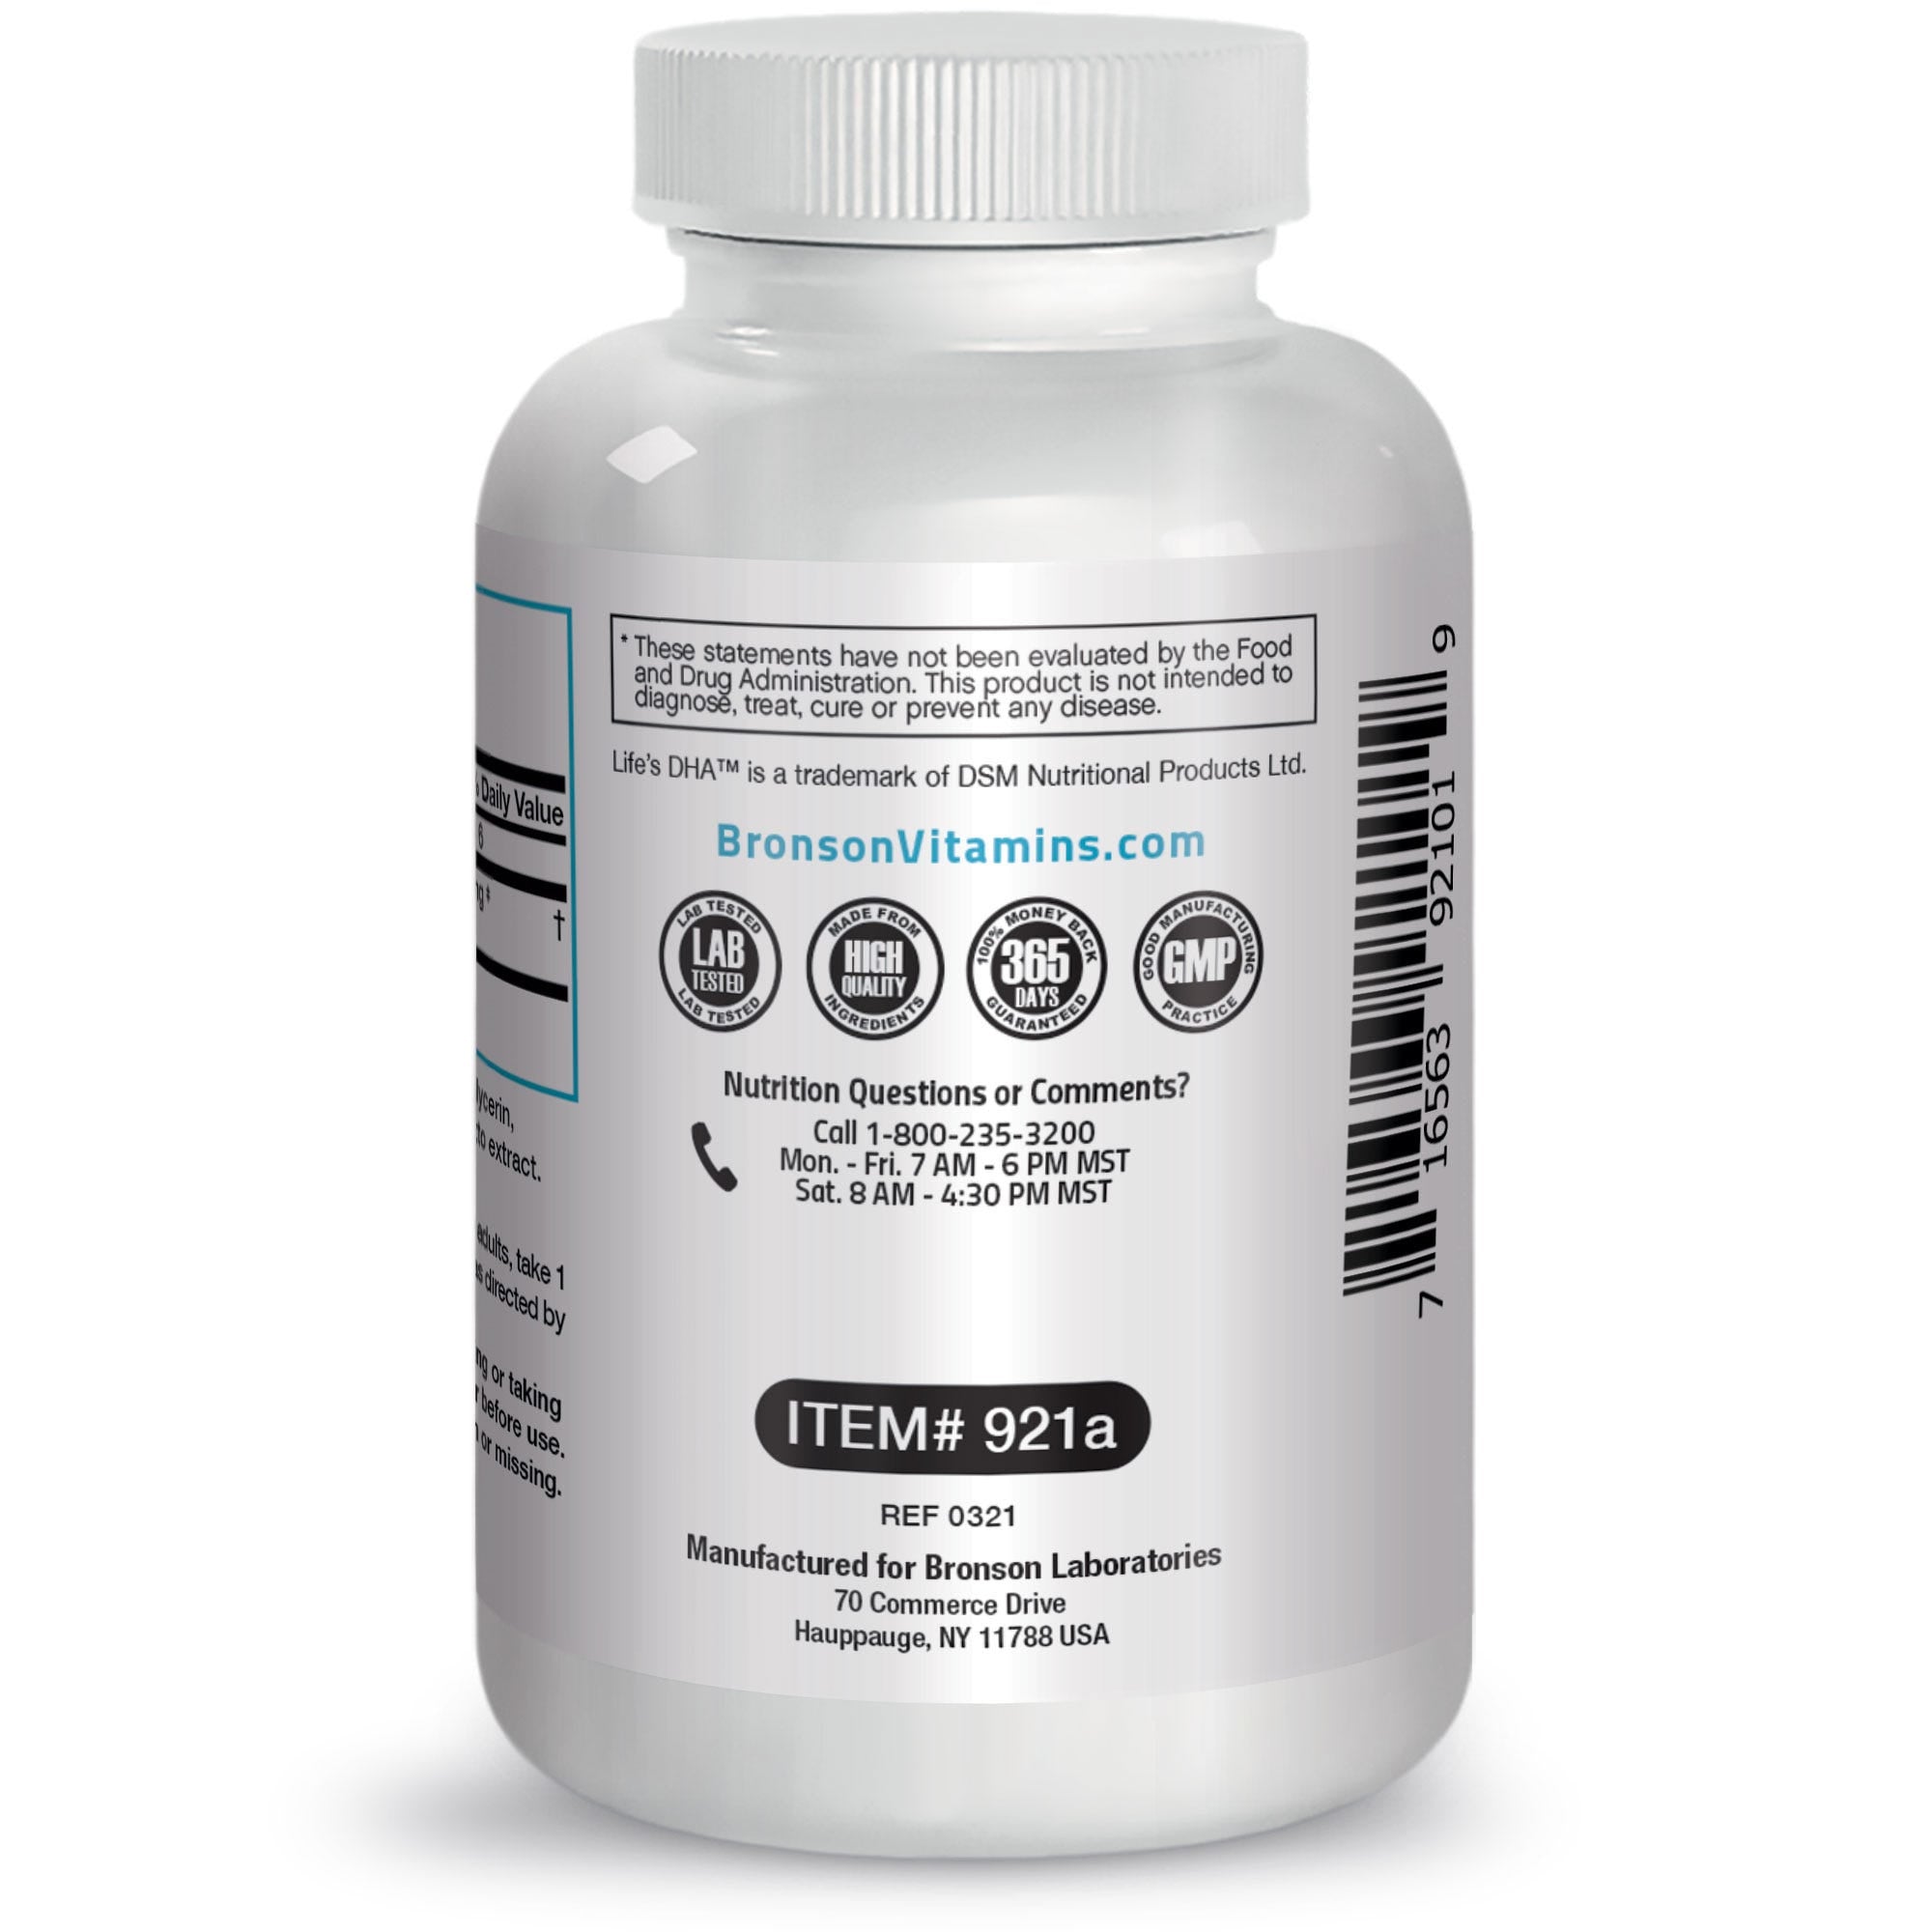 Life's DHA™ Vegetarian Derived from Algae - 200 mg - 30 Softgels view 5 of 6